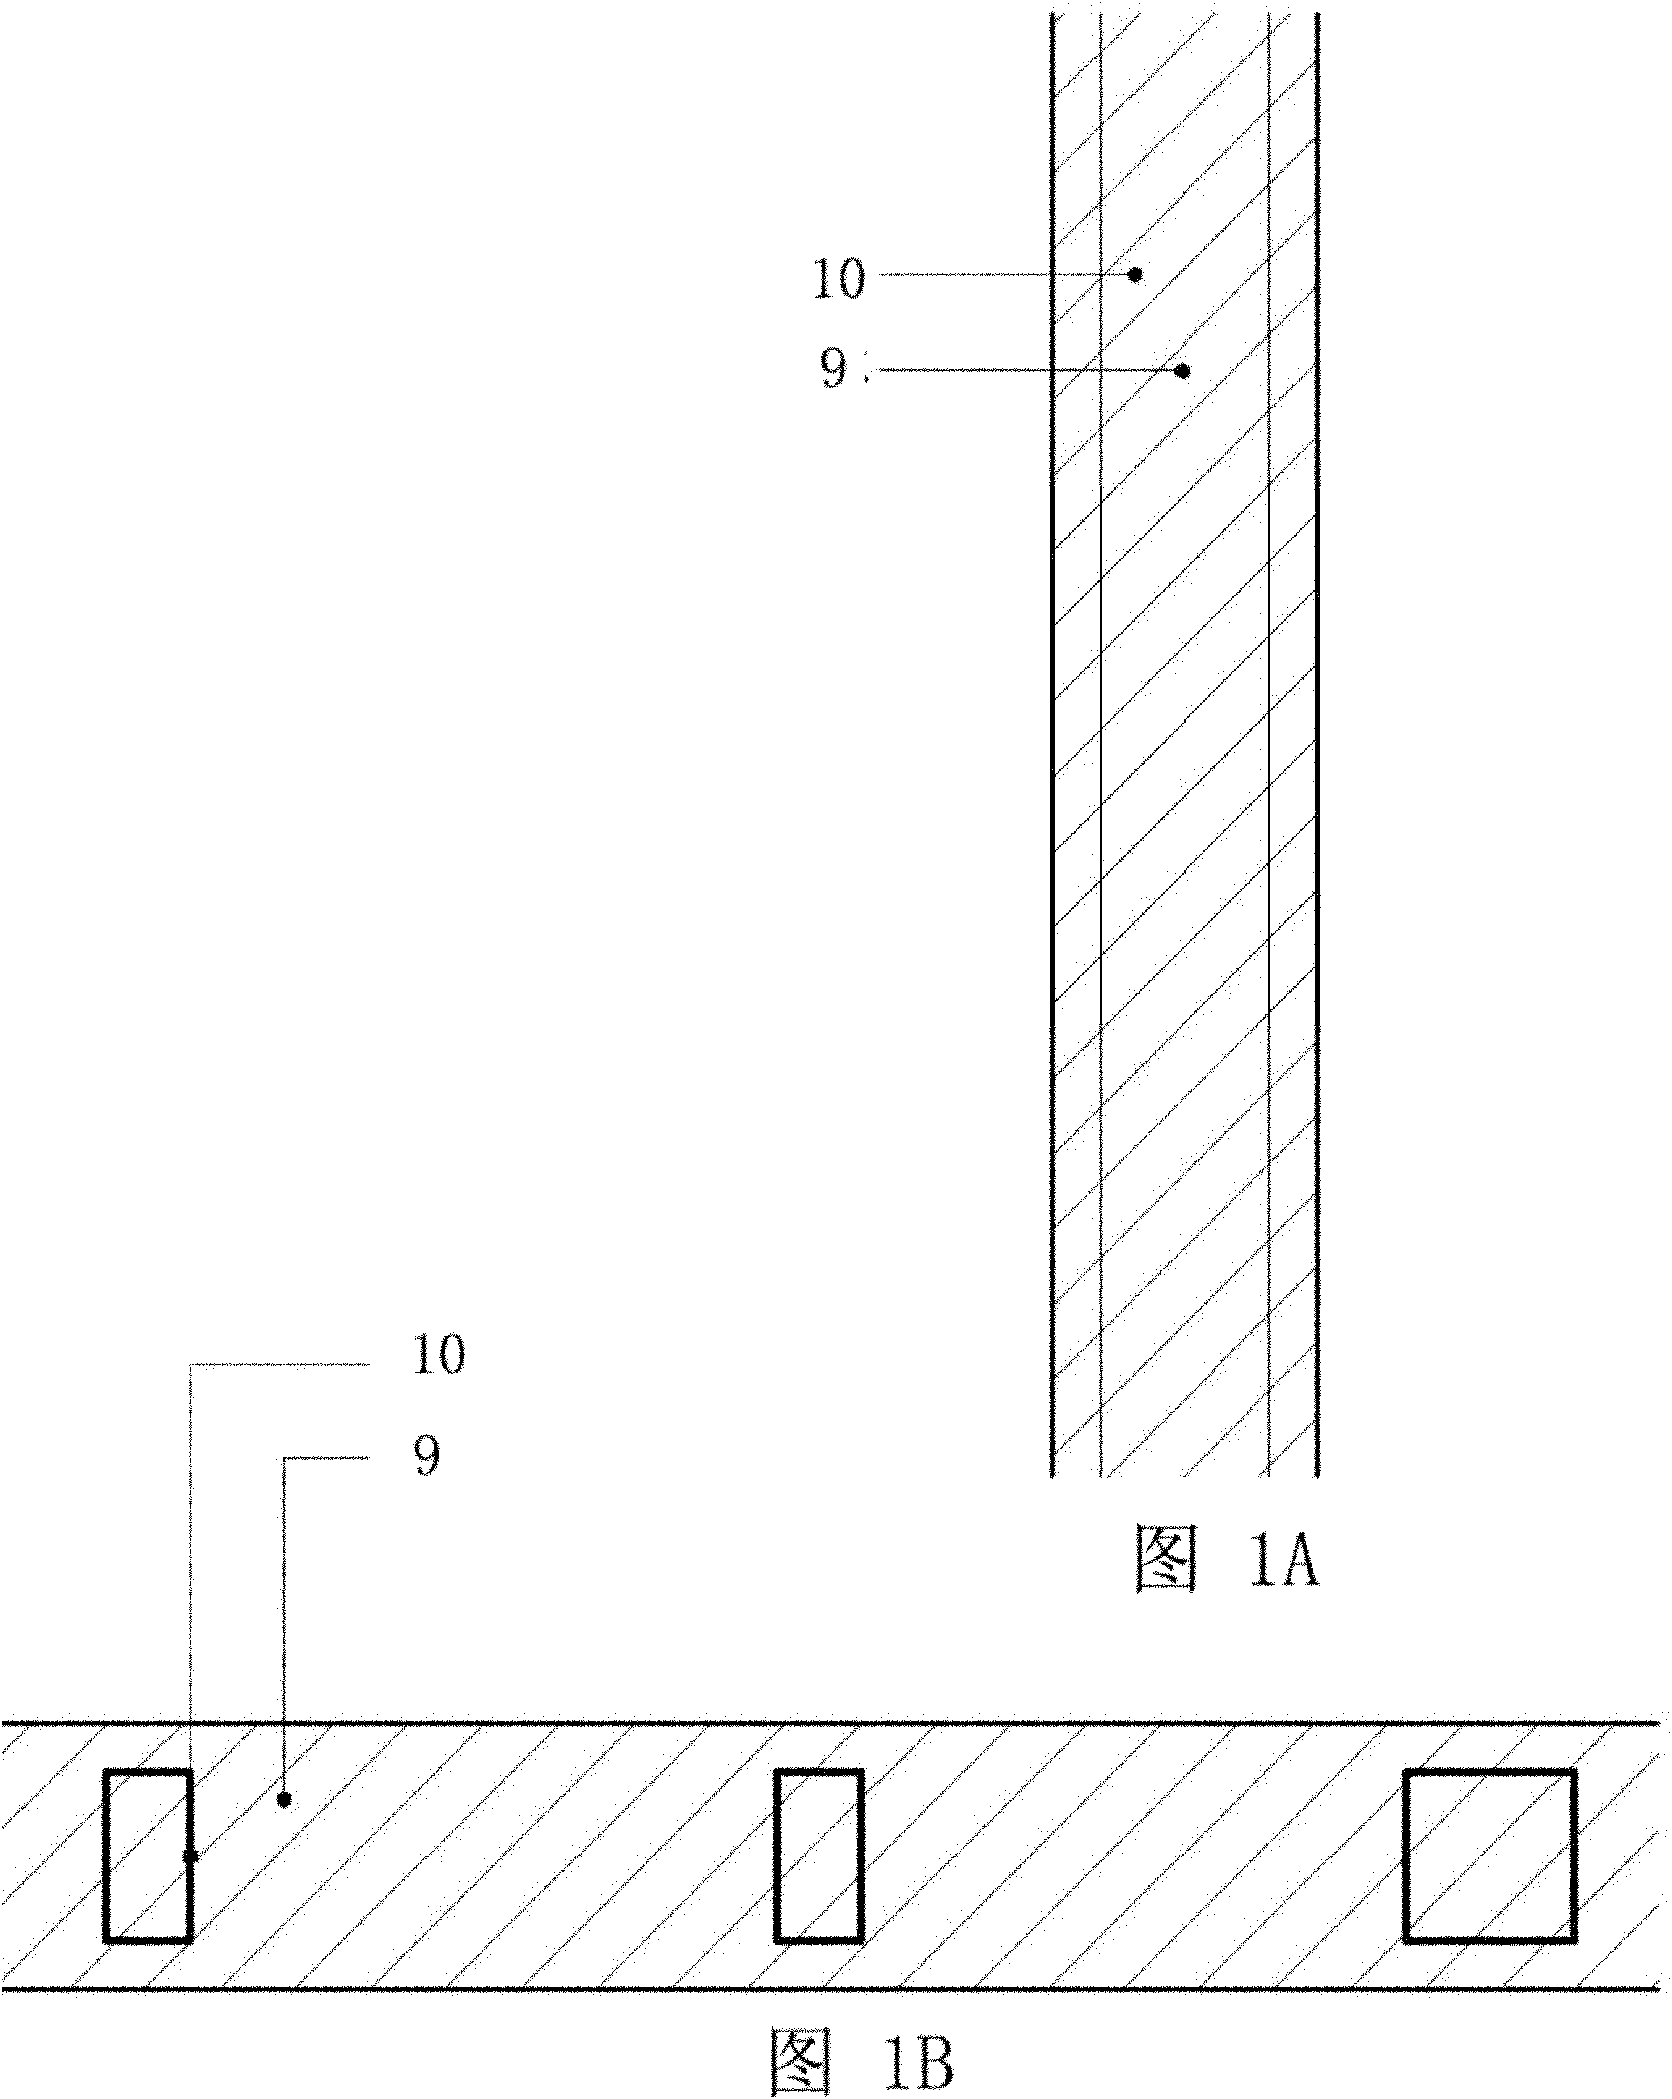 Wall with tie steel mesh structure